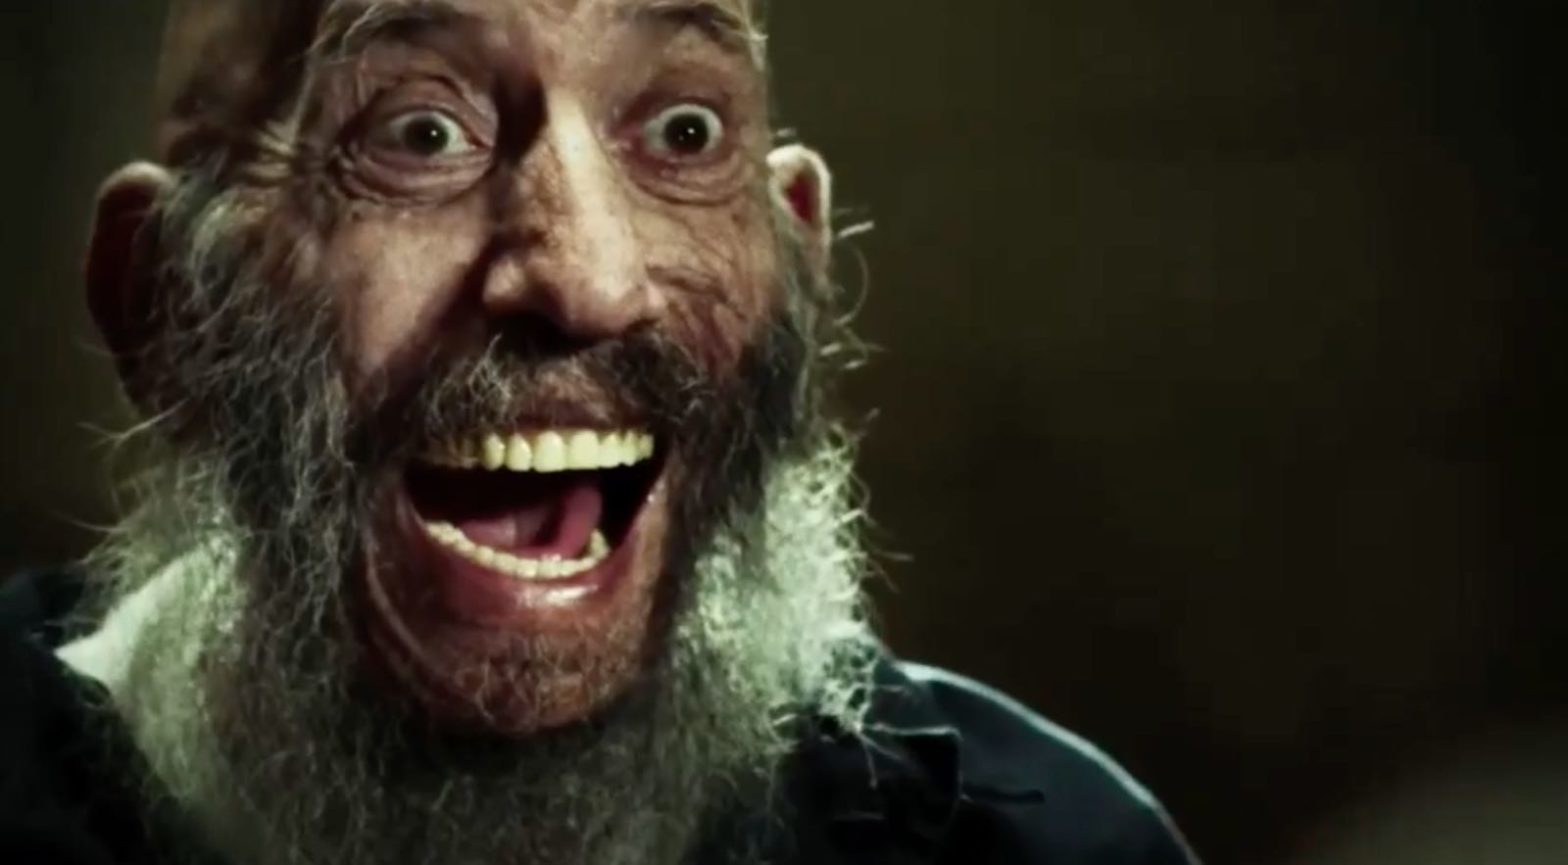 Sid Haig, The house of 1000 corpses & the devil´s Rejects star passes away